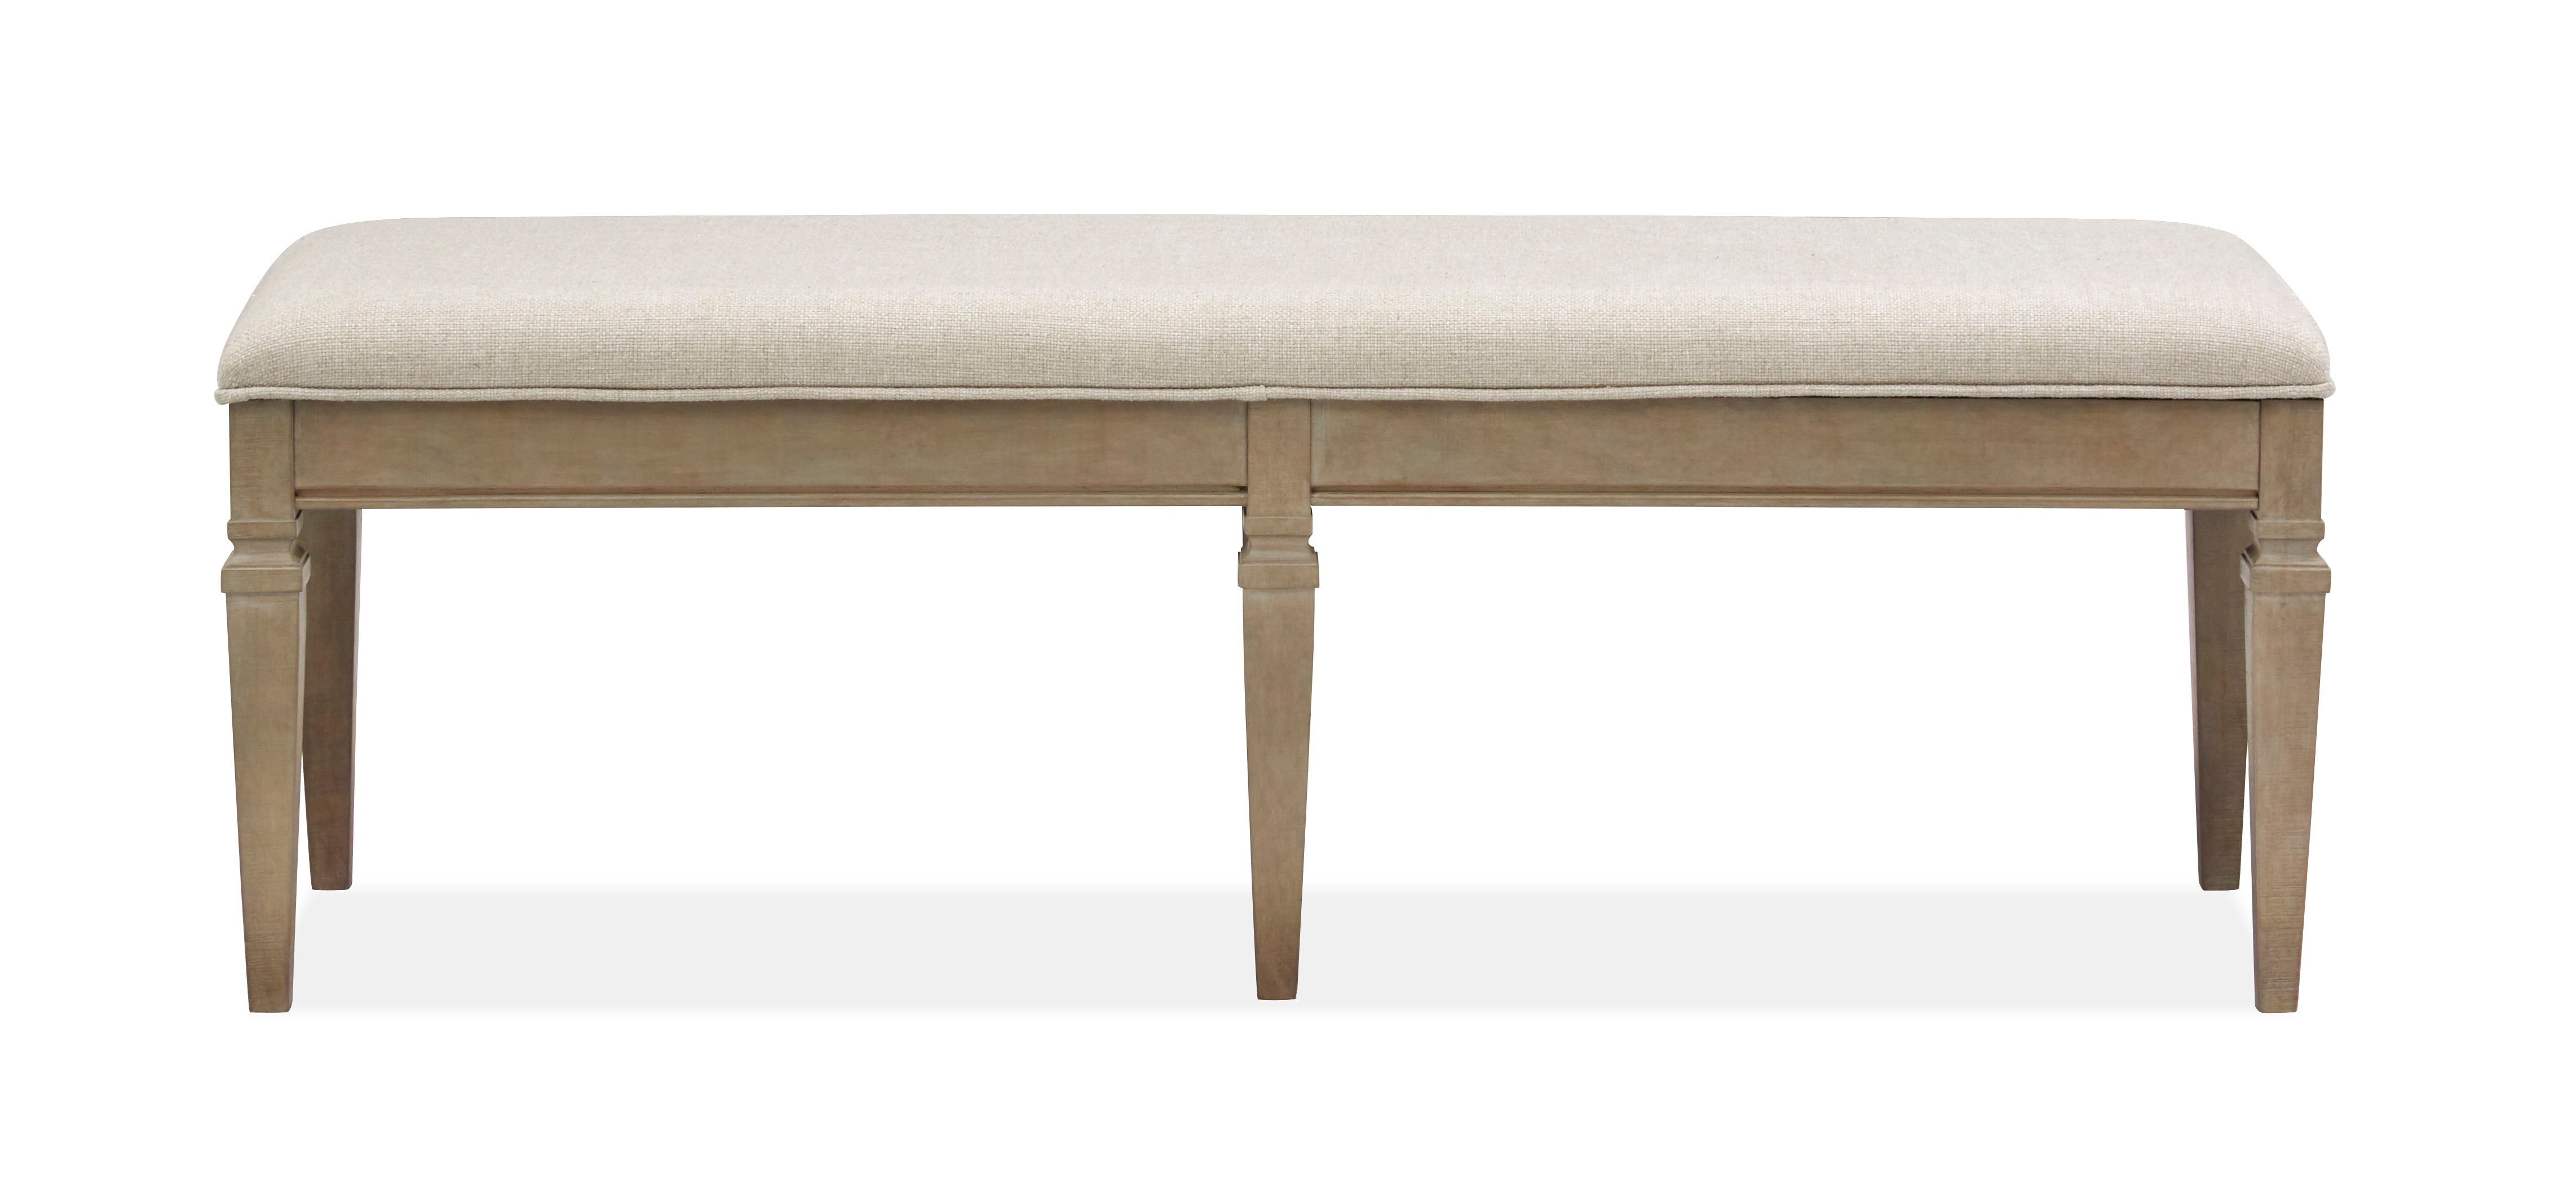 Lancaster - Bench With Upholstered Seat - Dovetail Grey